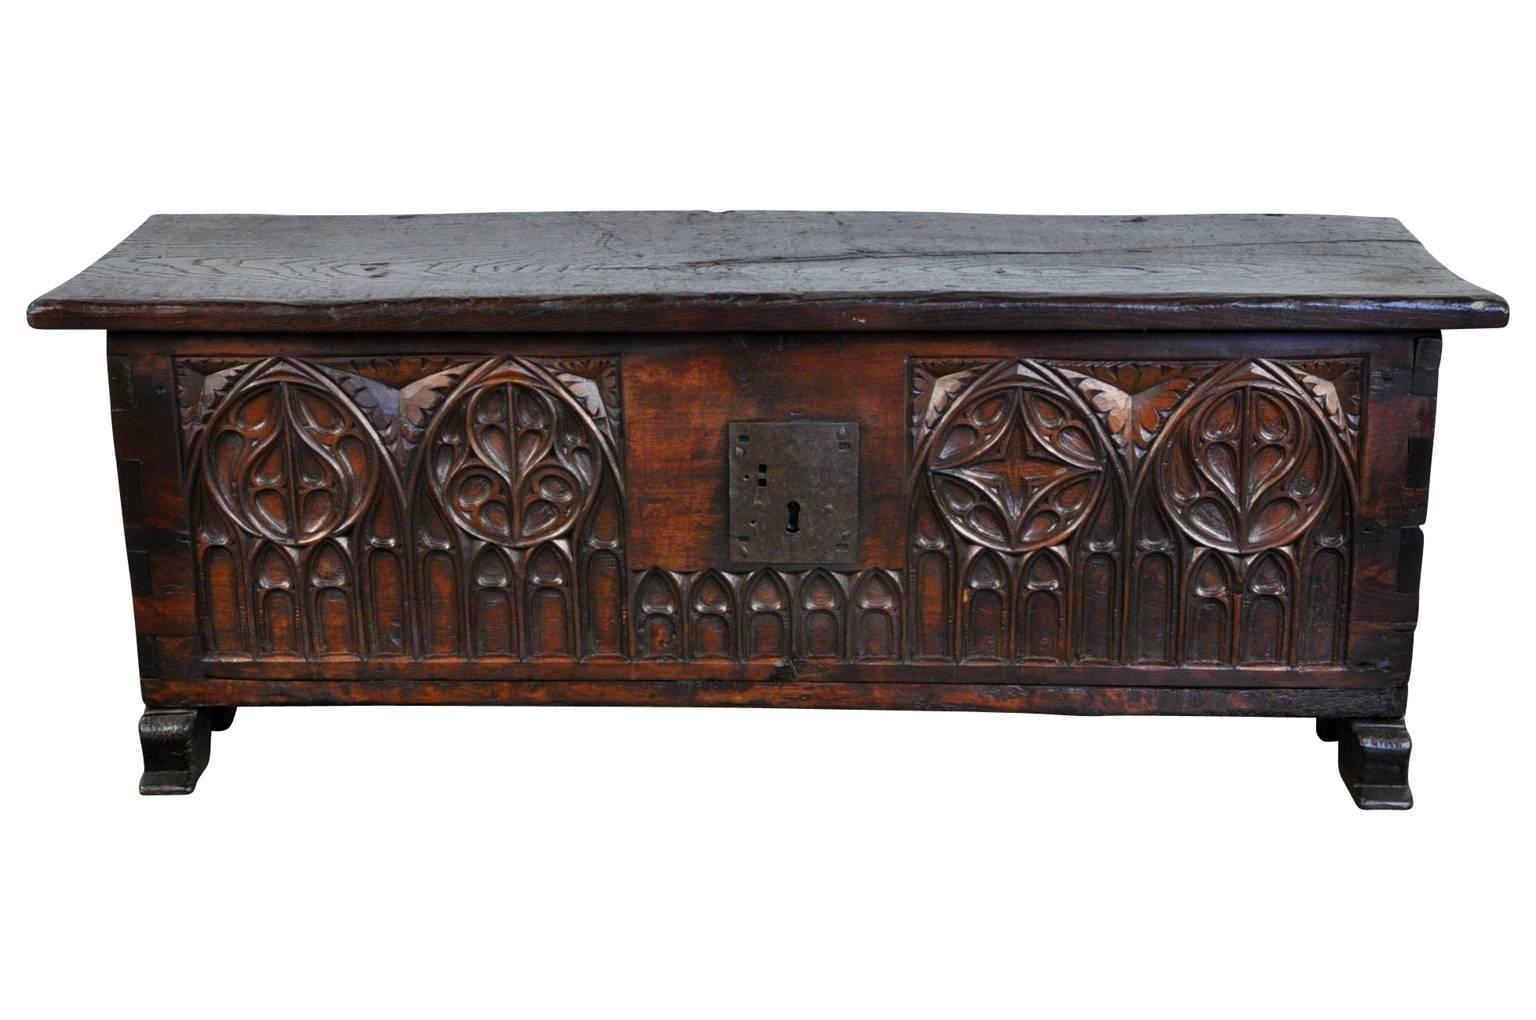 A very handsome 18th century Gothic style trunk from the Catalan region of Spain. Beautifully constructed from chestnut with a solid board top and wonderful carving detail. Terrific at the base of a bed or as a coffee table. Great patina - very rich